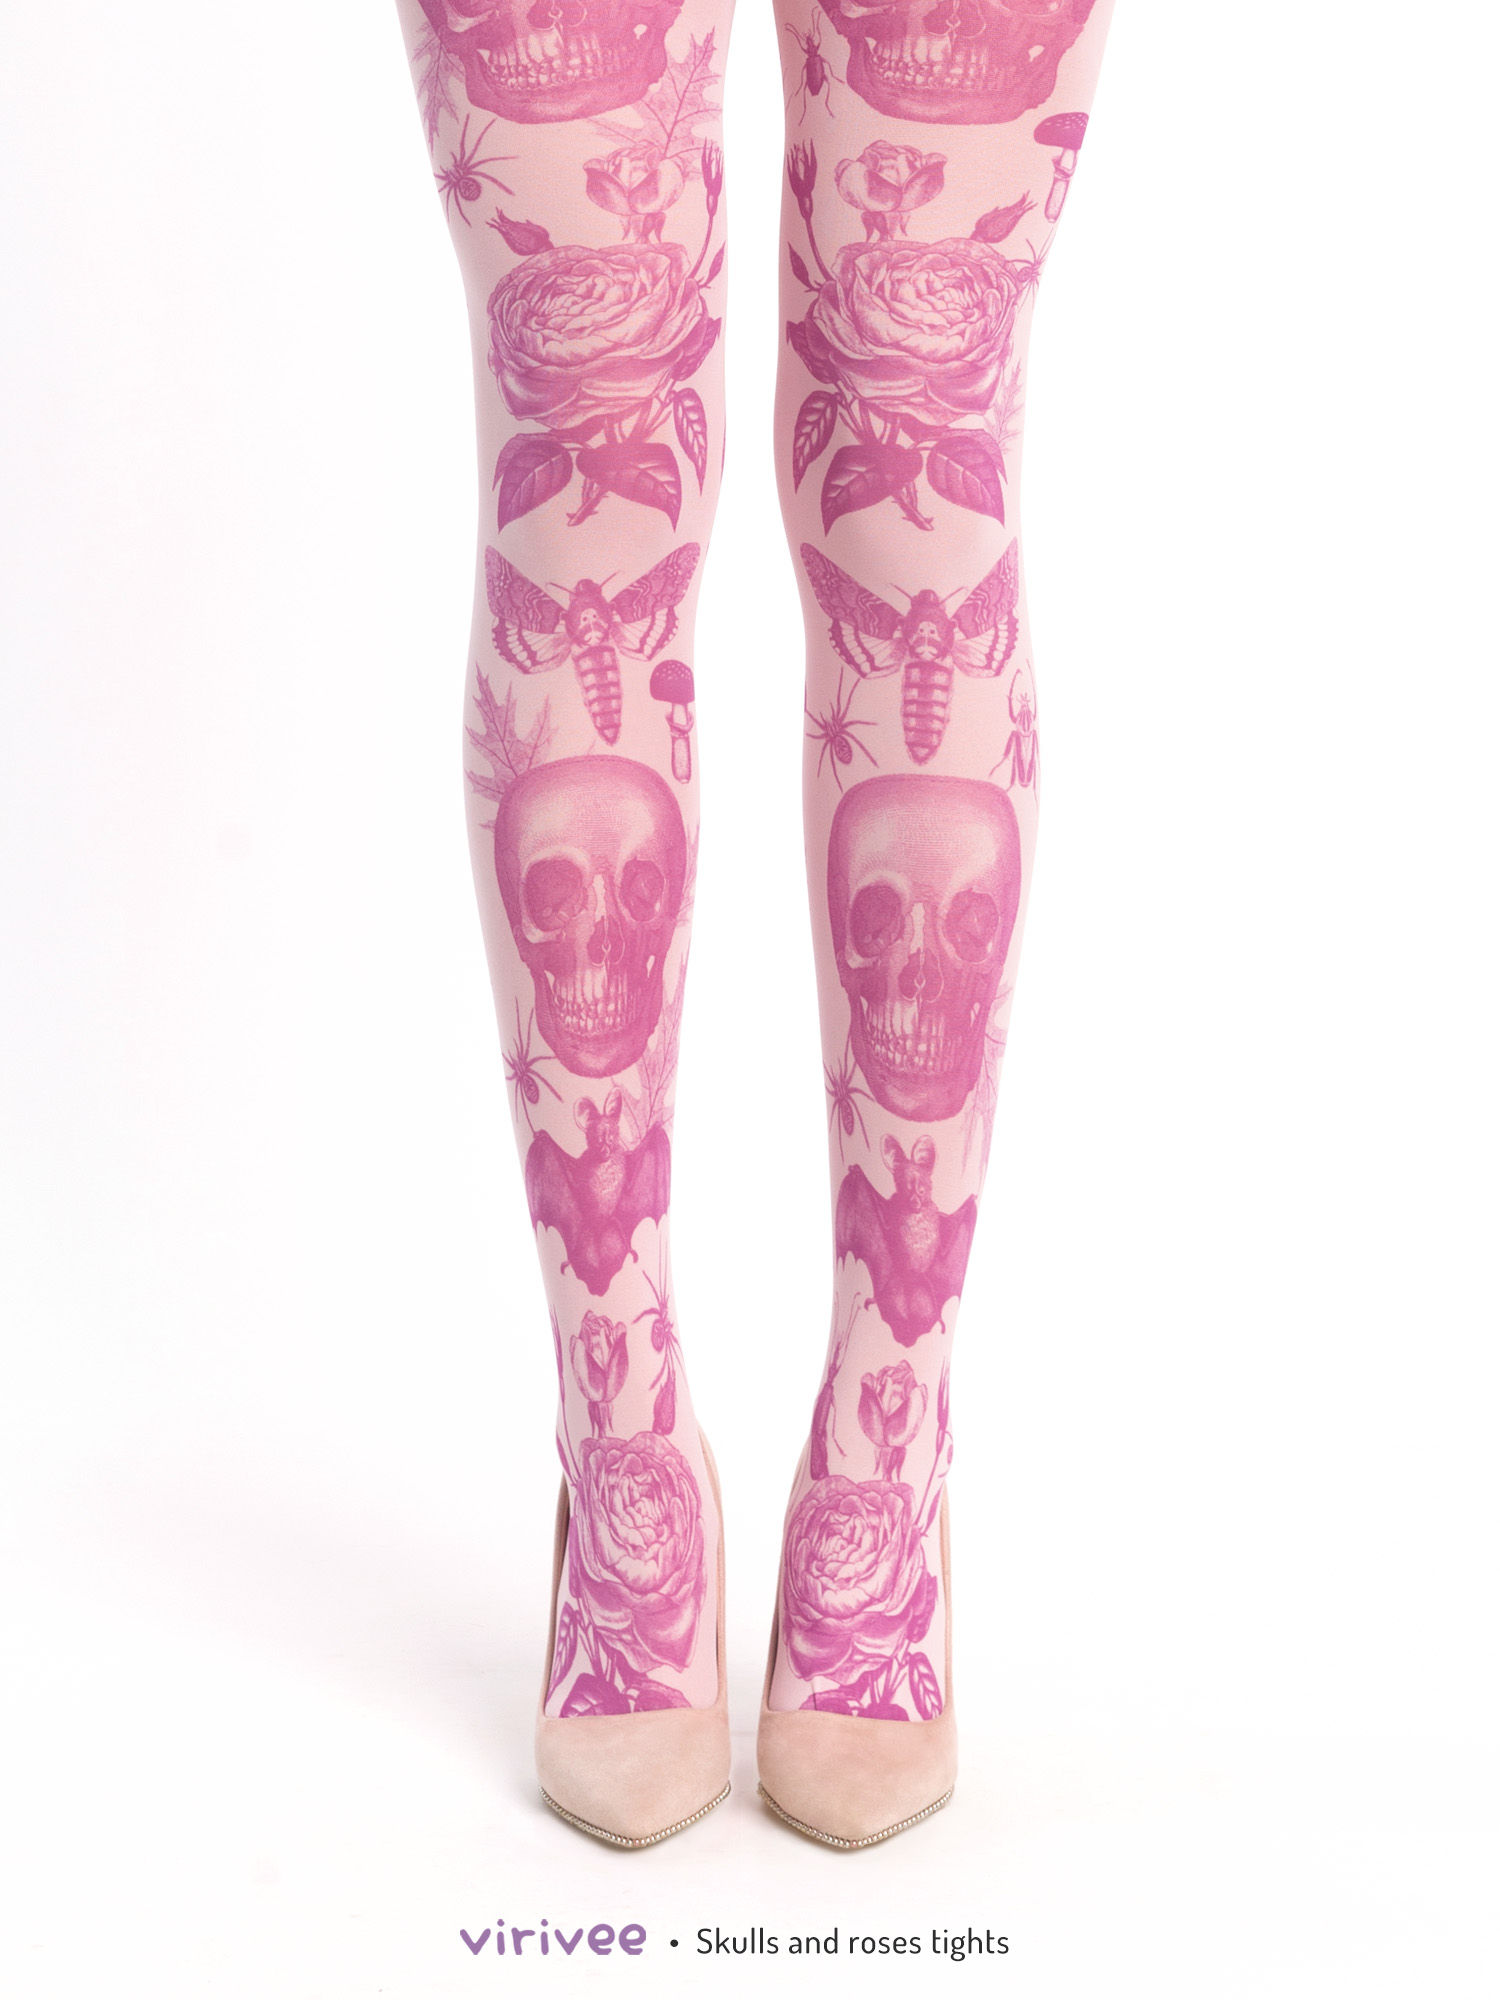 Skull and roses tights, pink